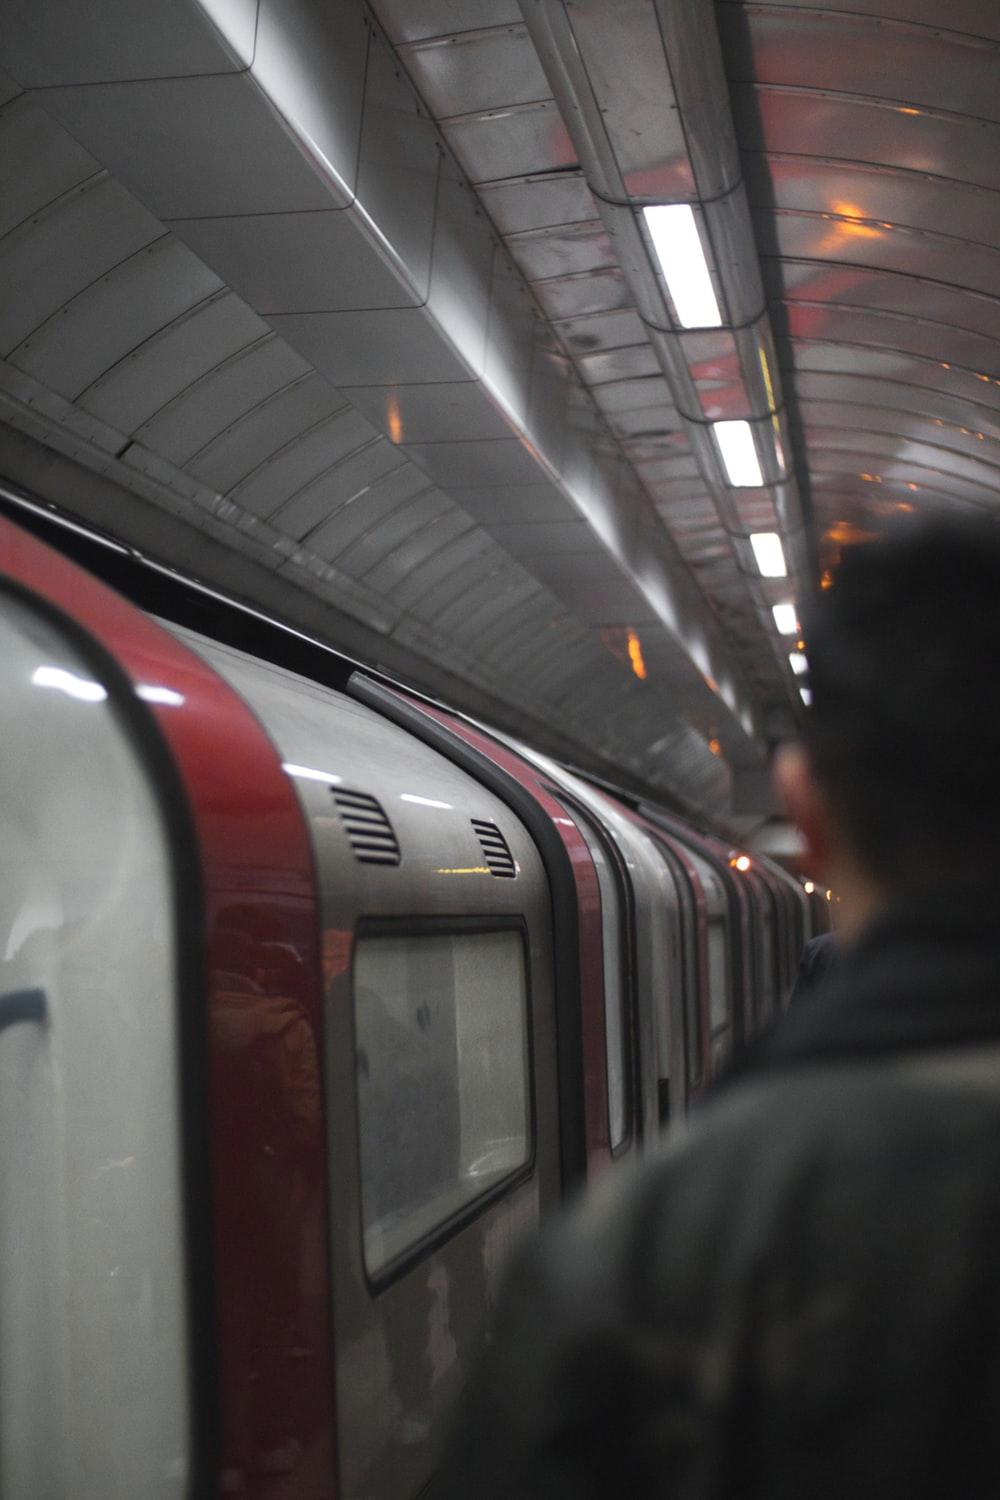 London Underground Picture. Download Free Image